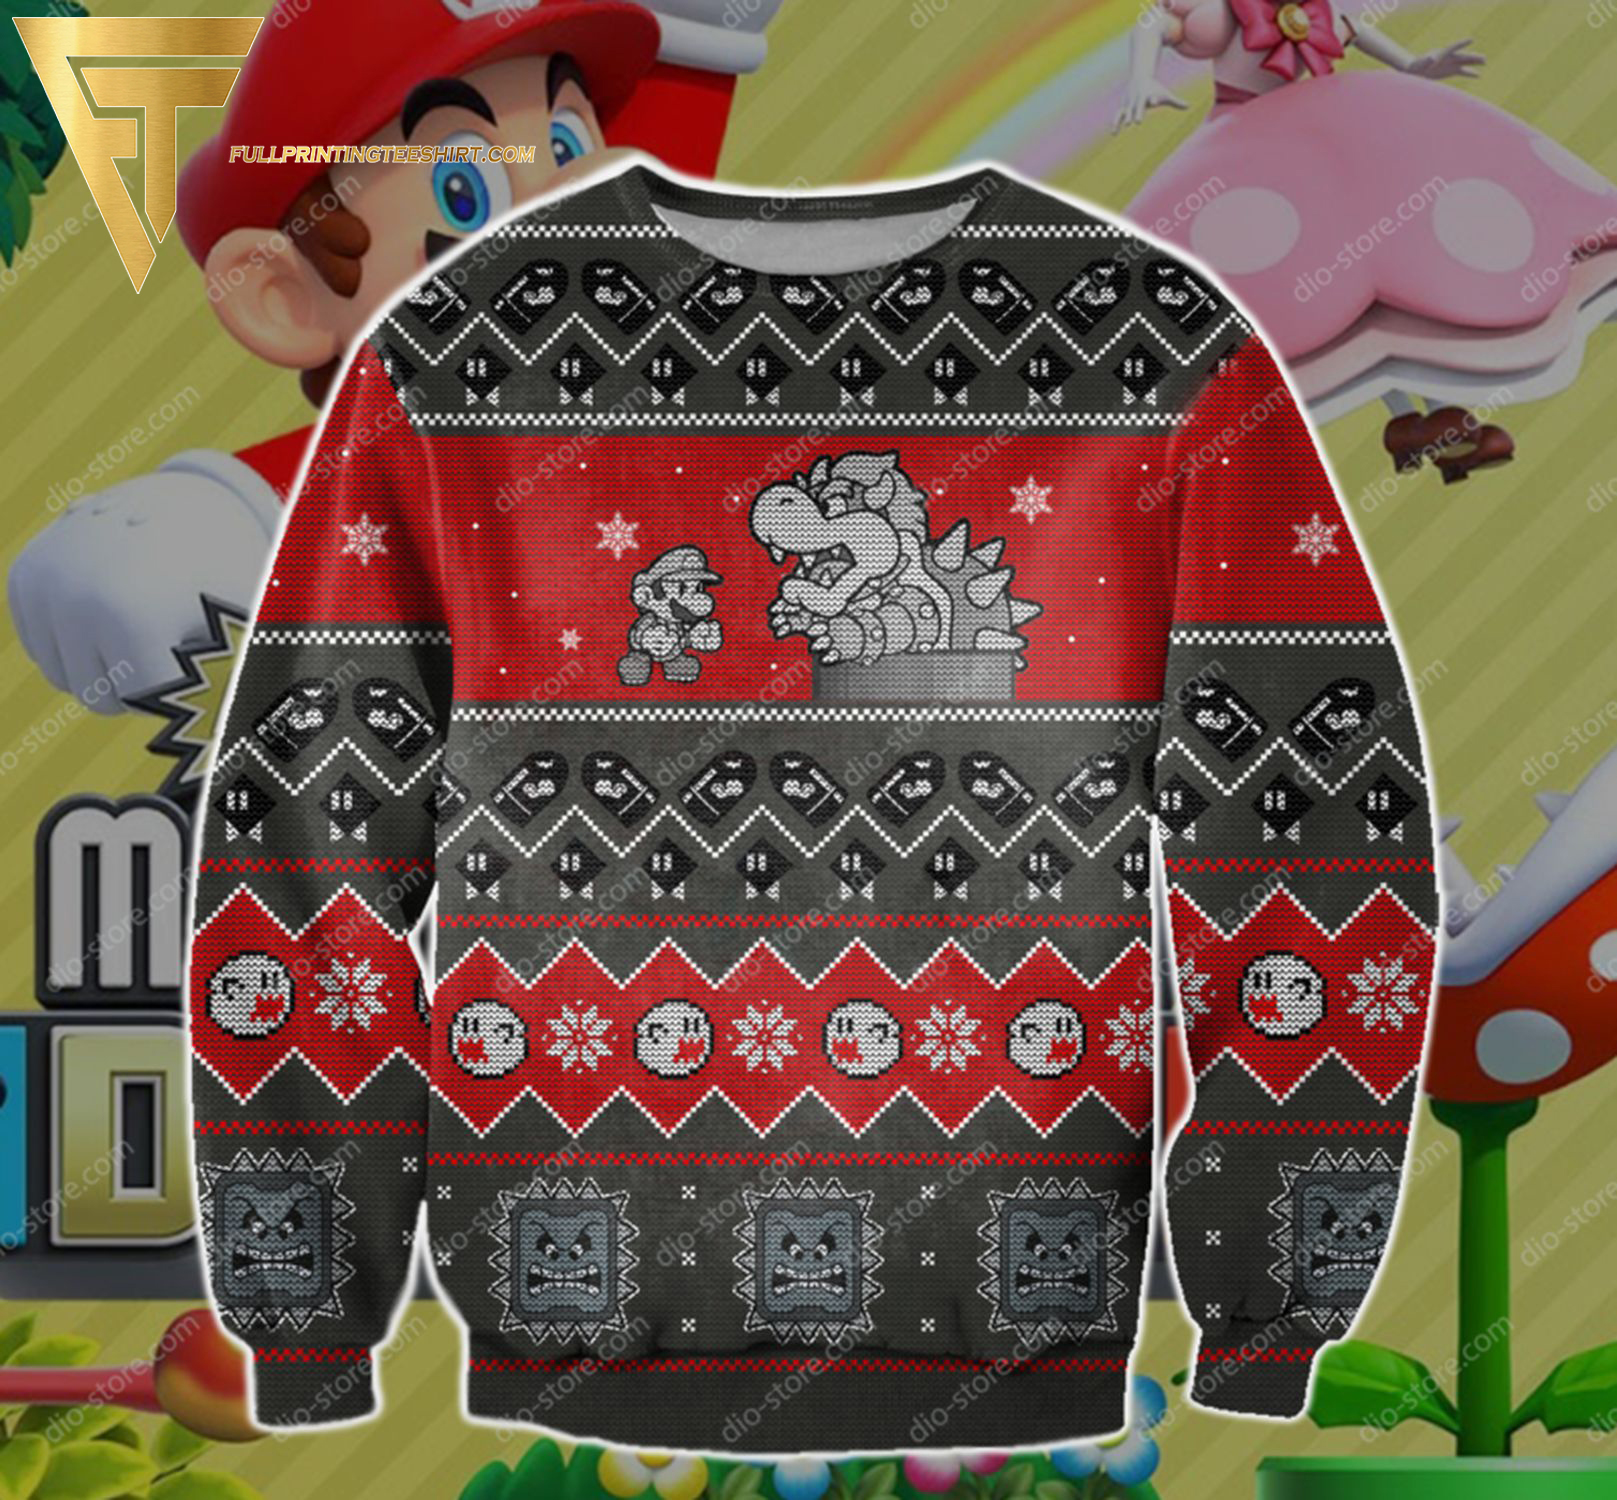 Super Mario Full Print Ugly Christmas Sweater